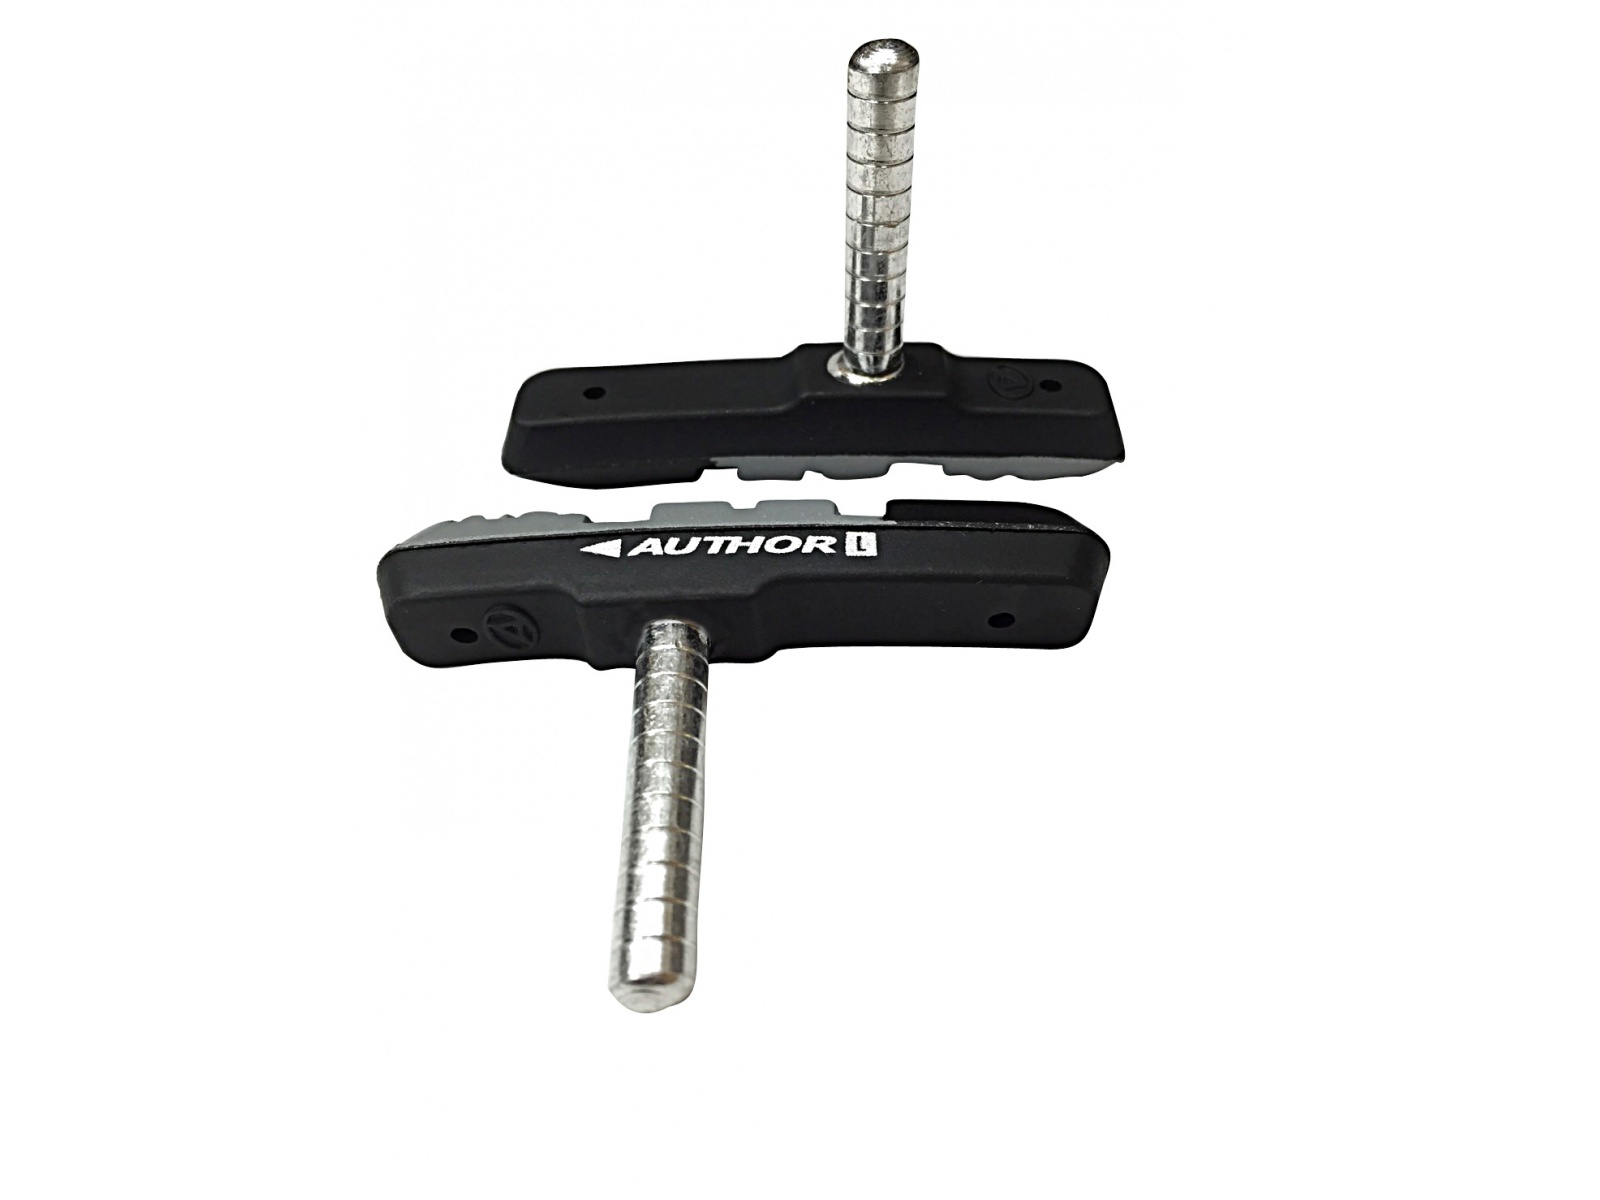 AUTHOR Brake pads ABS-2CC-Canti